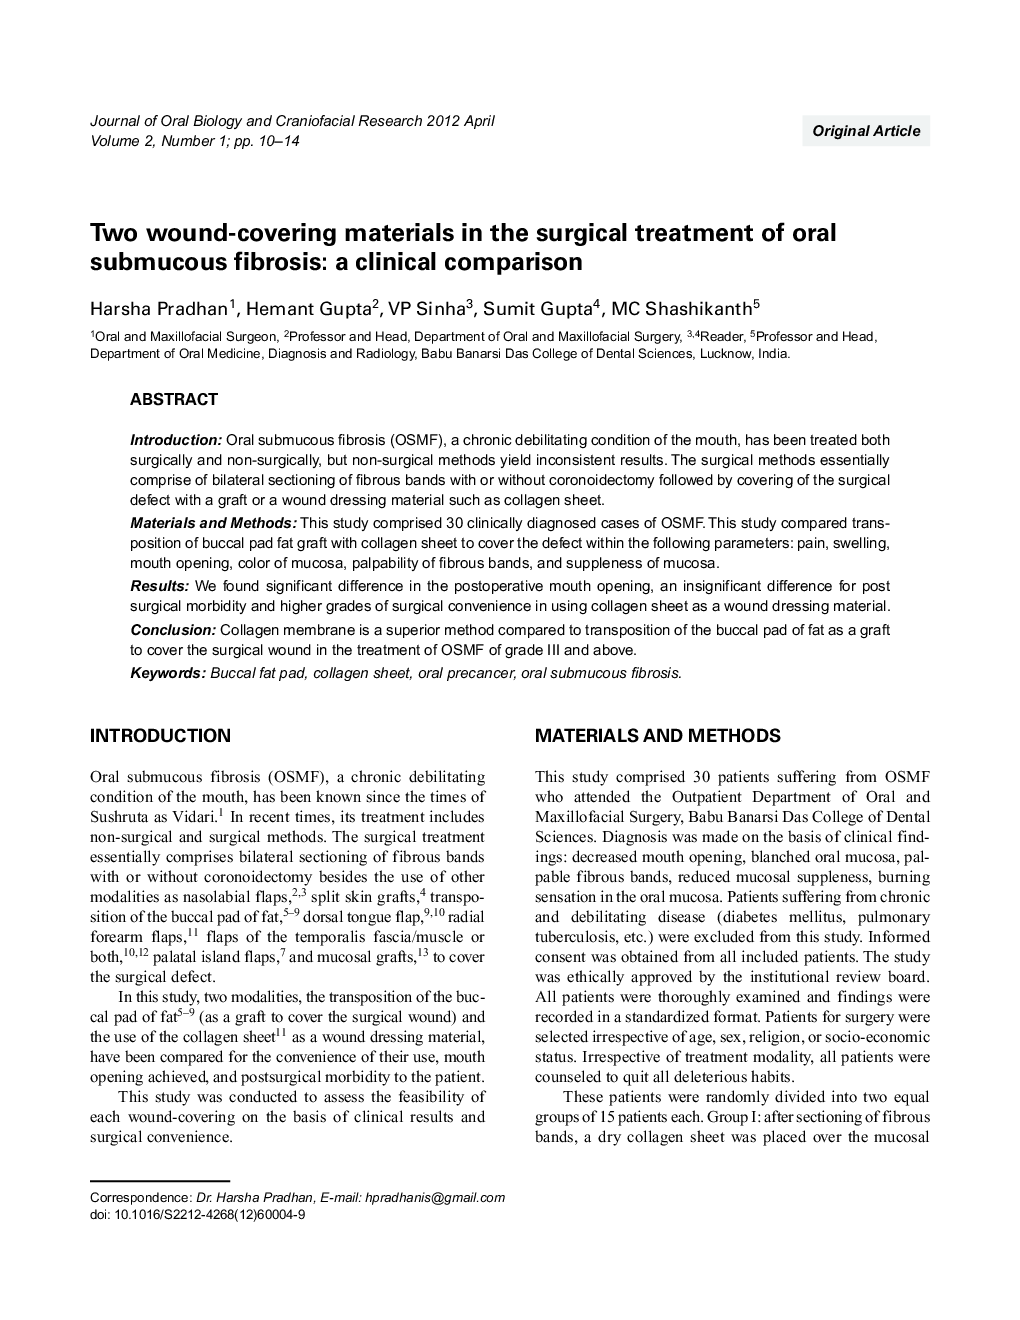 Two wound-covering materials in the surgical treatment of oral submucous fibrosis: a clinical comparison